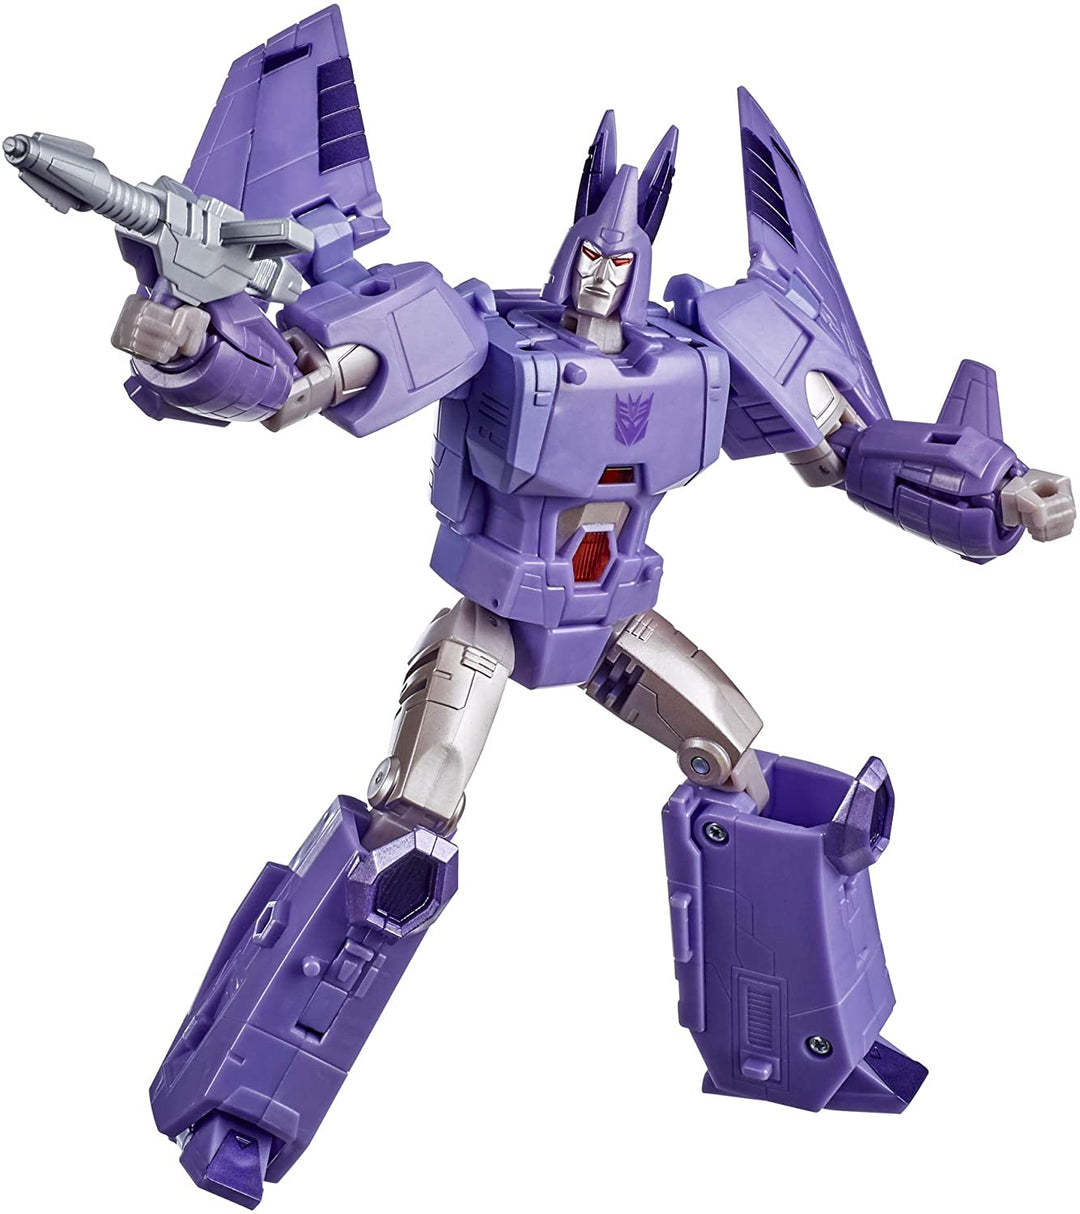 Transformers Generations War for Cybertron: Kingdom Voyager WFC-K9 Cyclonus Action Figure